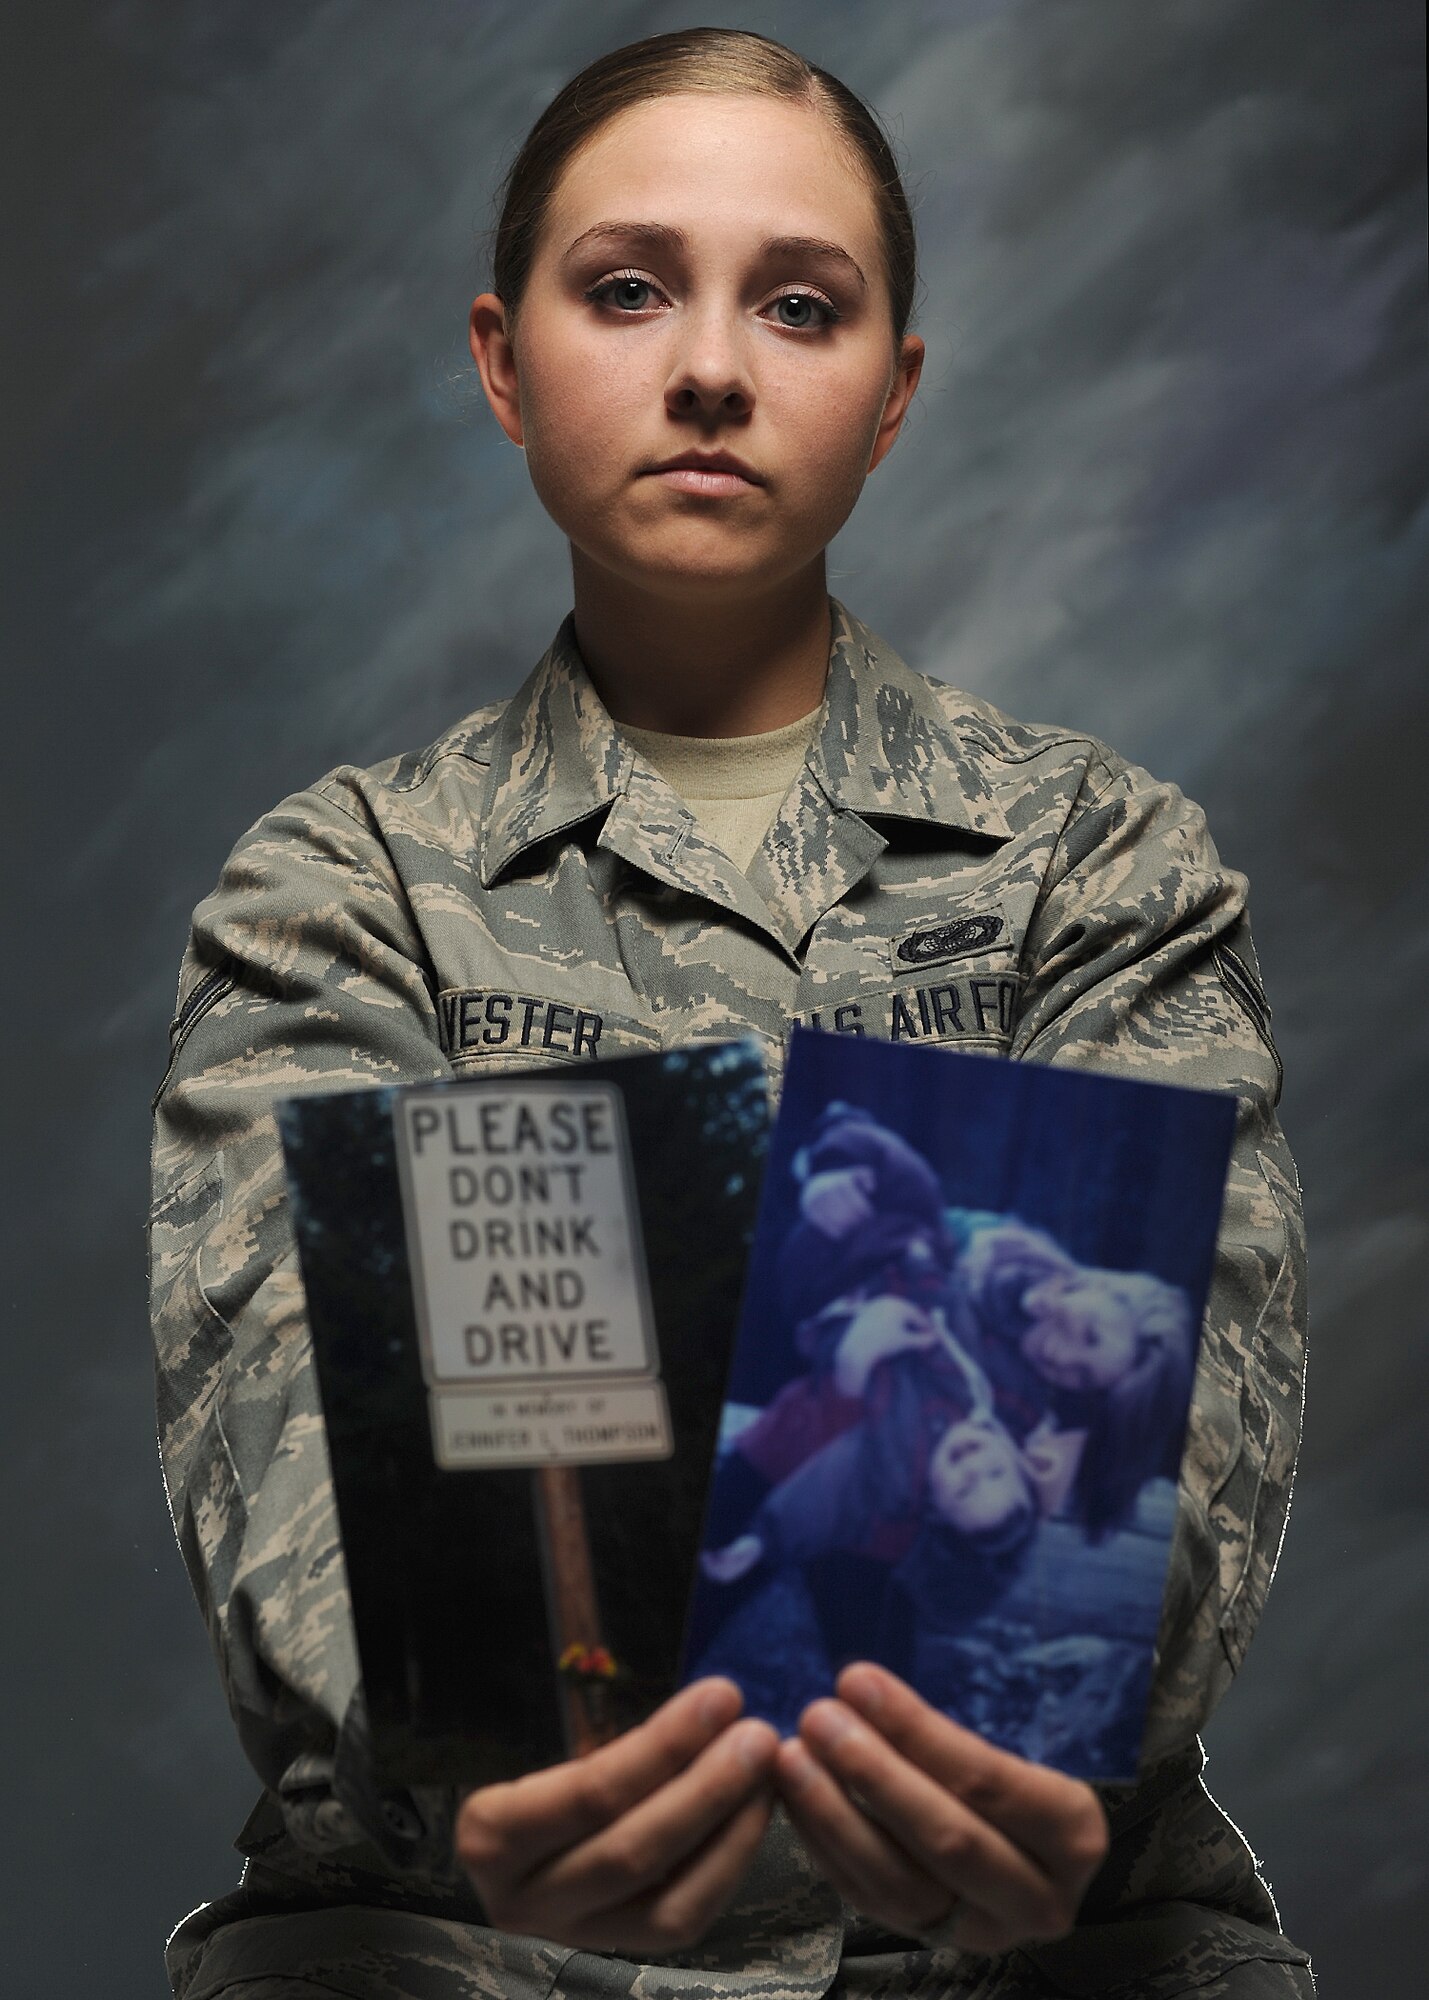 Airman 1st Class Madison Sylvester shares the story of how her first scar became her reason for never driving while under the influence of alcohol. Sylvester is a 319th Air Base Wing Public Affairs broadcaster. (U.S. Air Force photo by Senior Airman Xavier Navarro)

